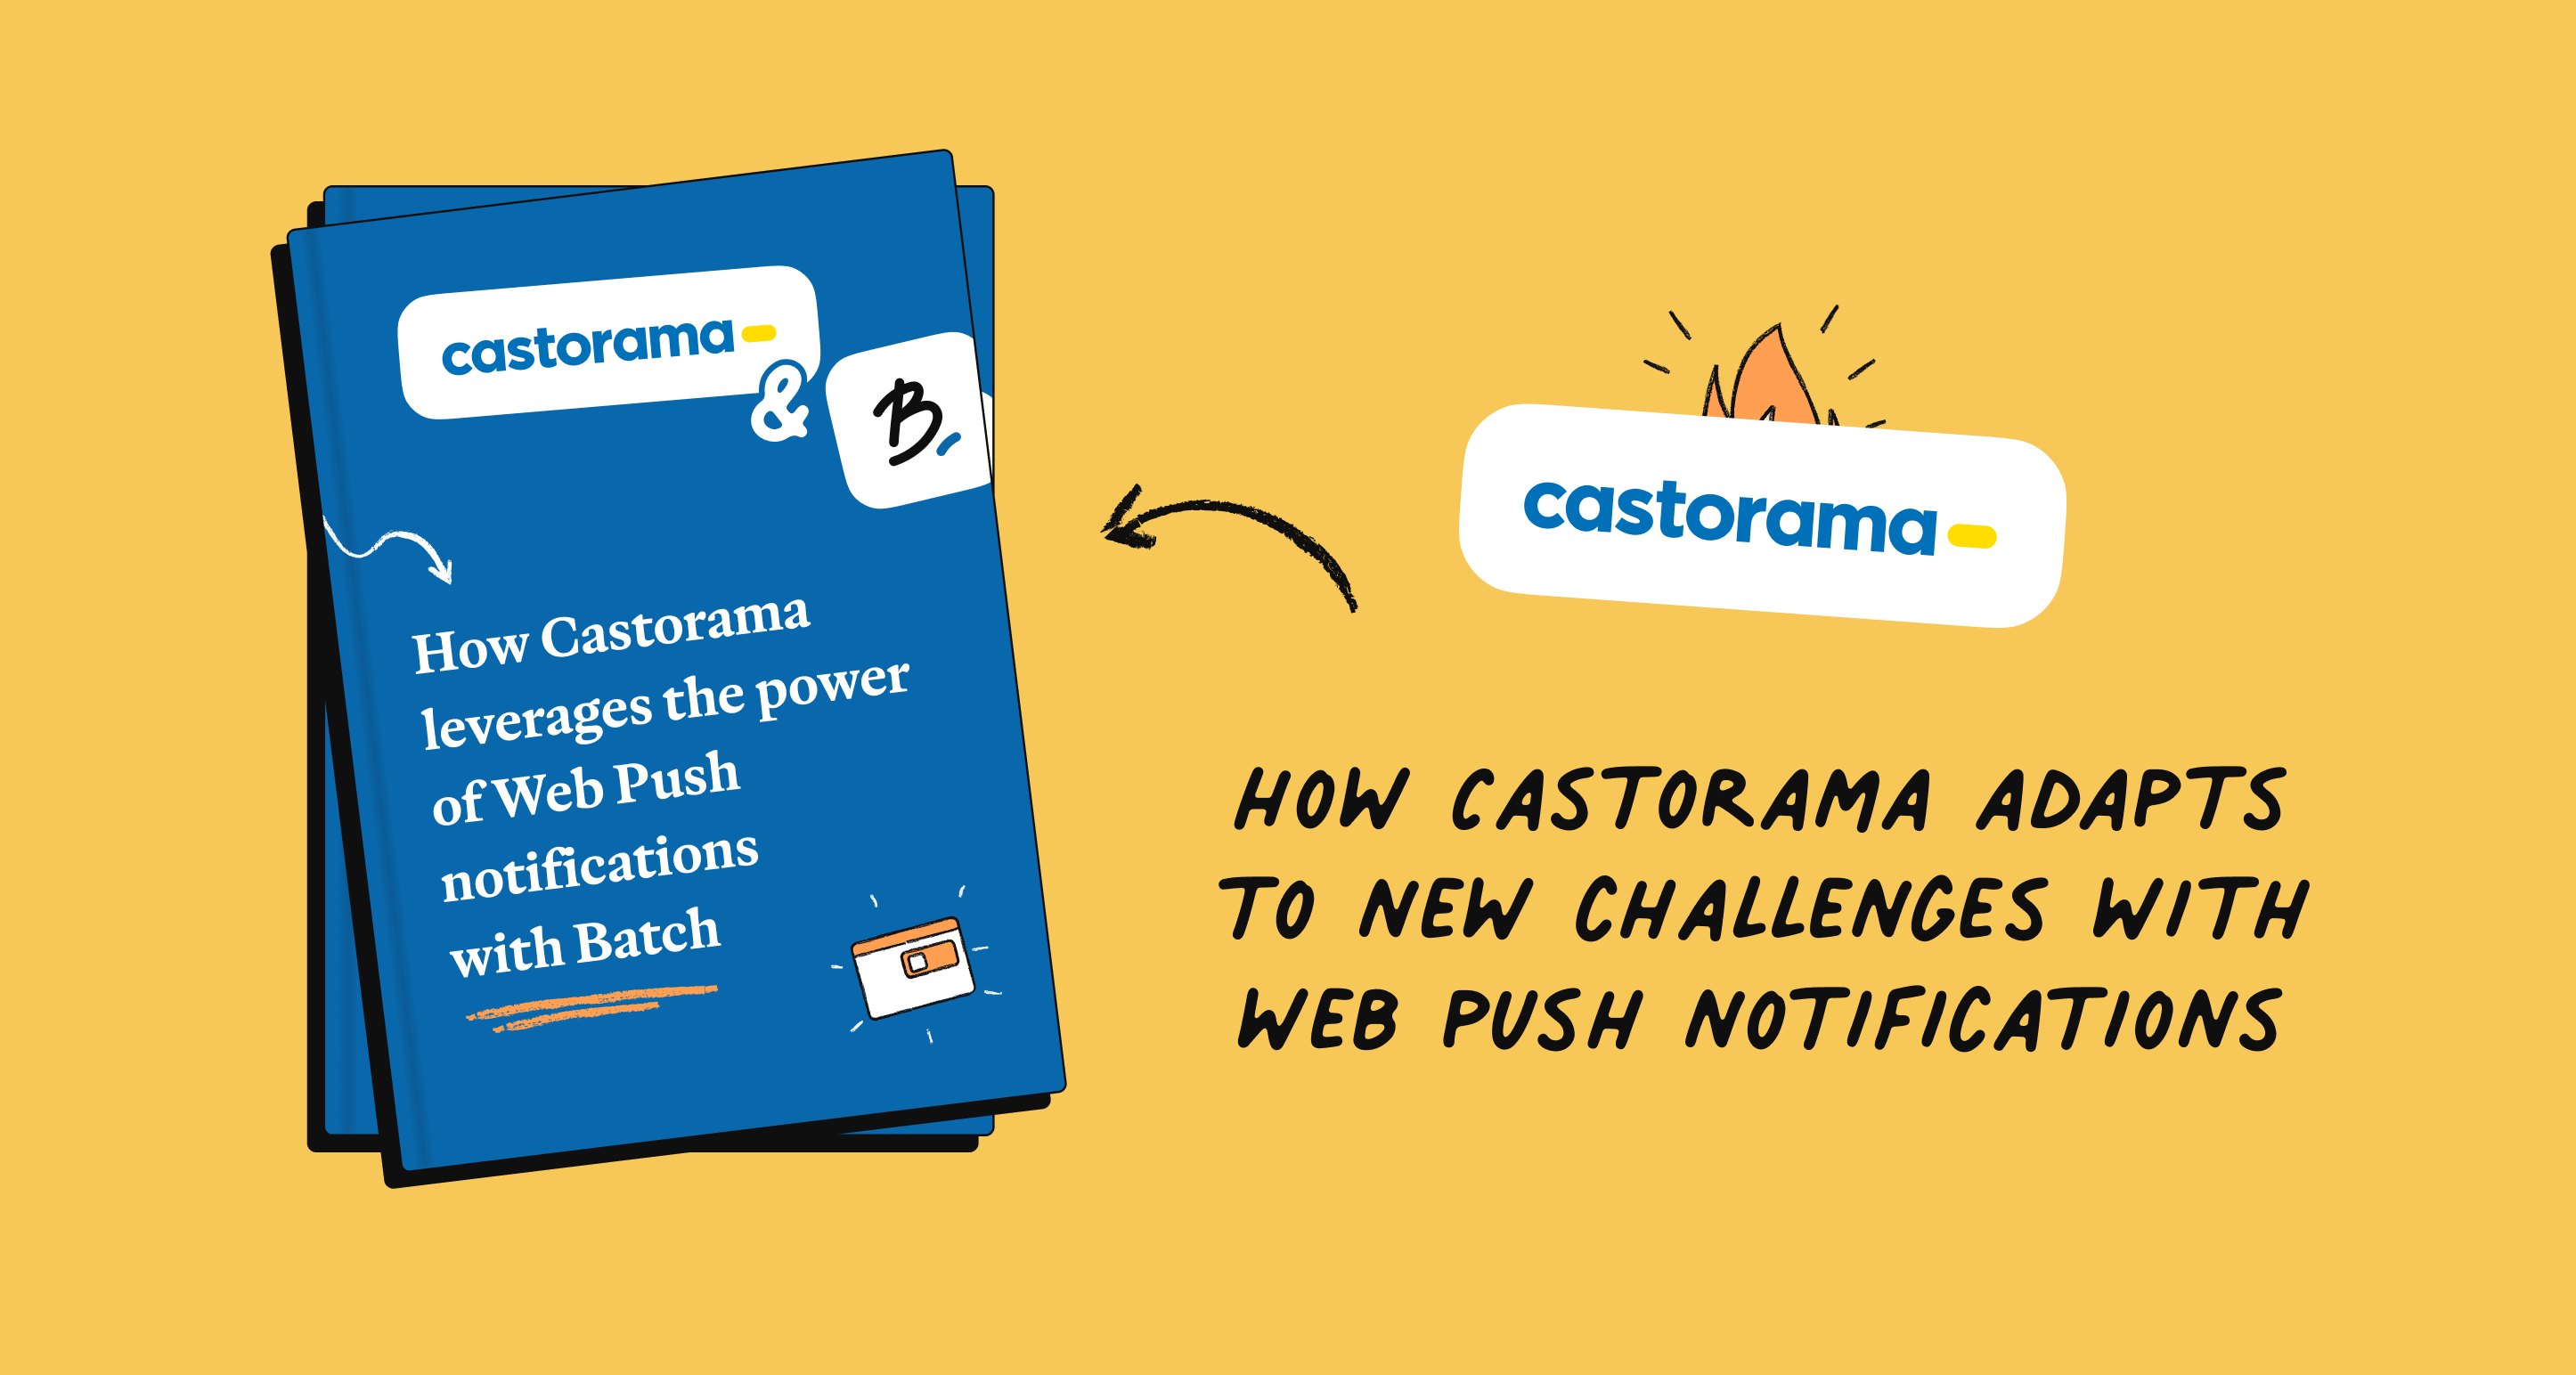 How Castorama leverages the power of Web Push notifications